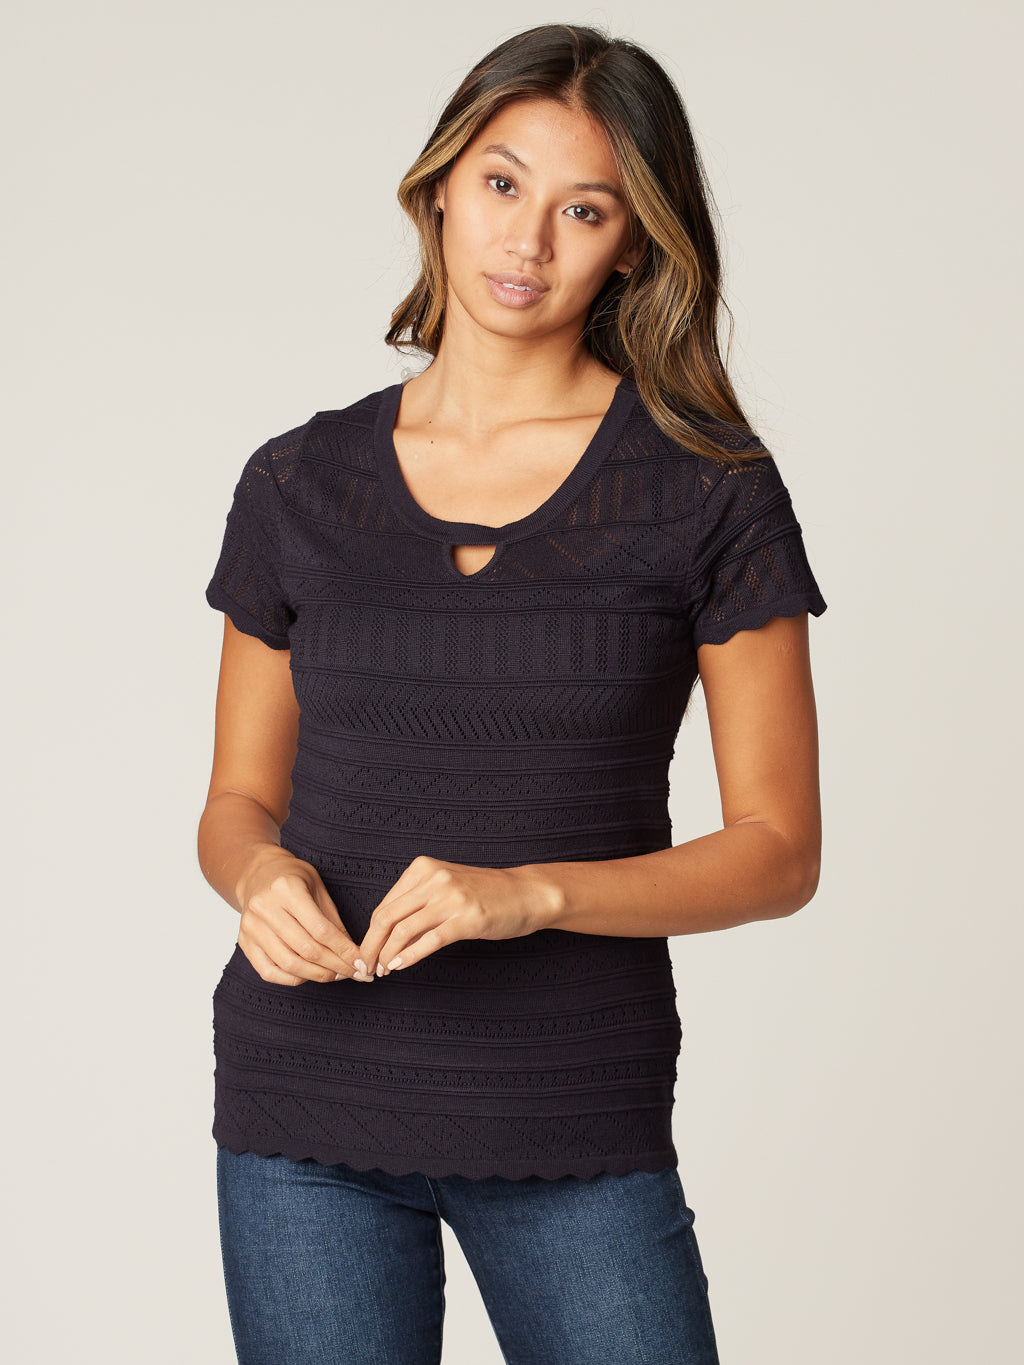 Short-sleeve semi-fitted pullover sweater